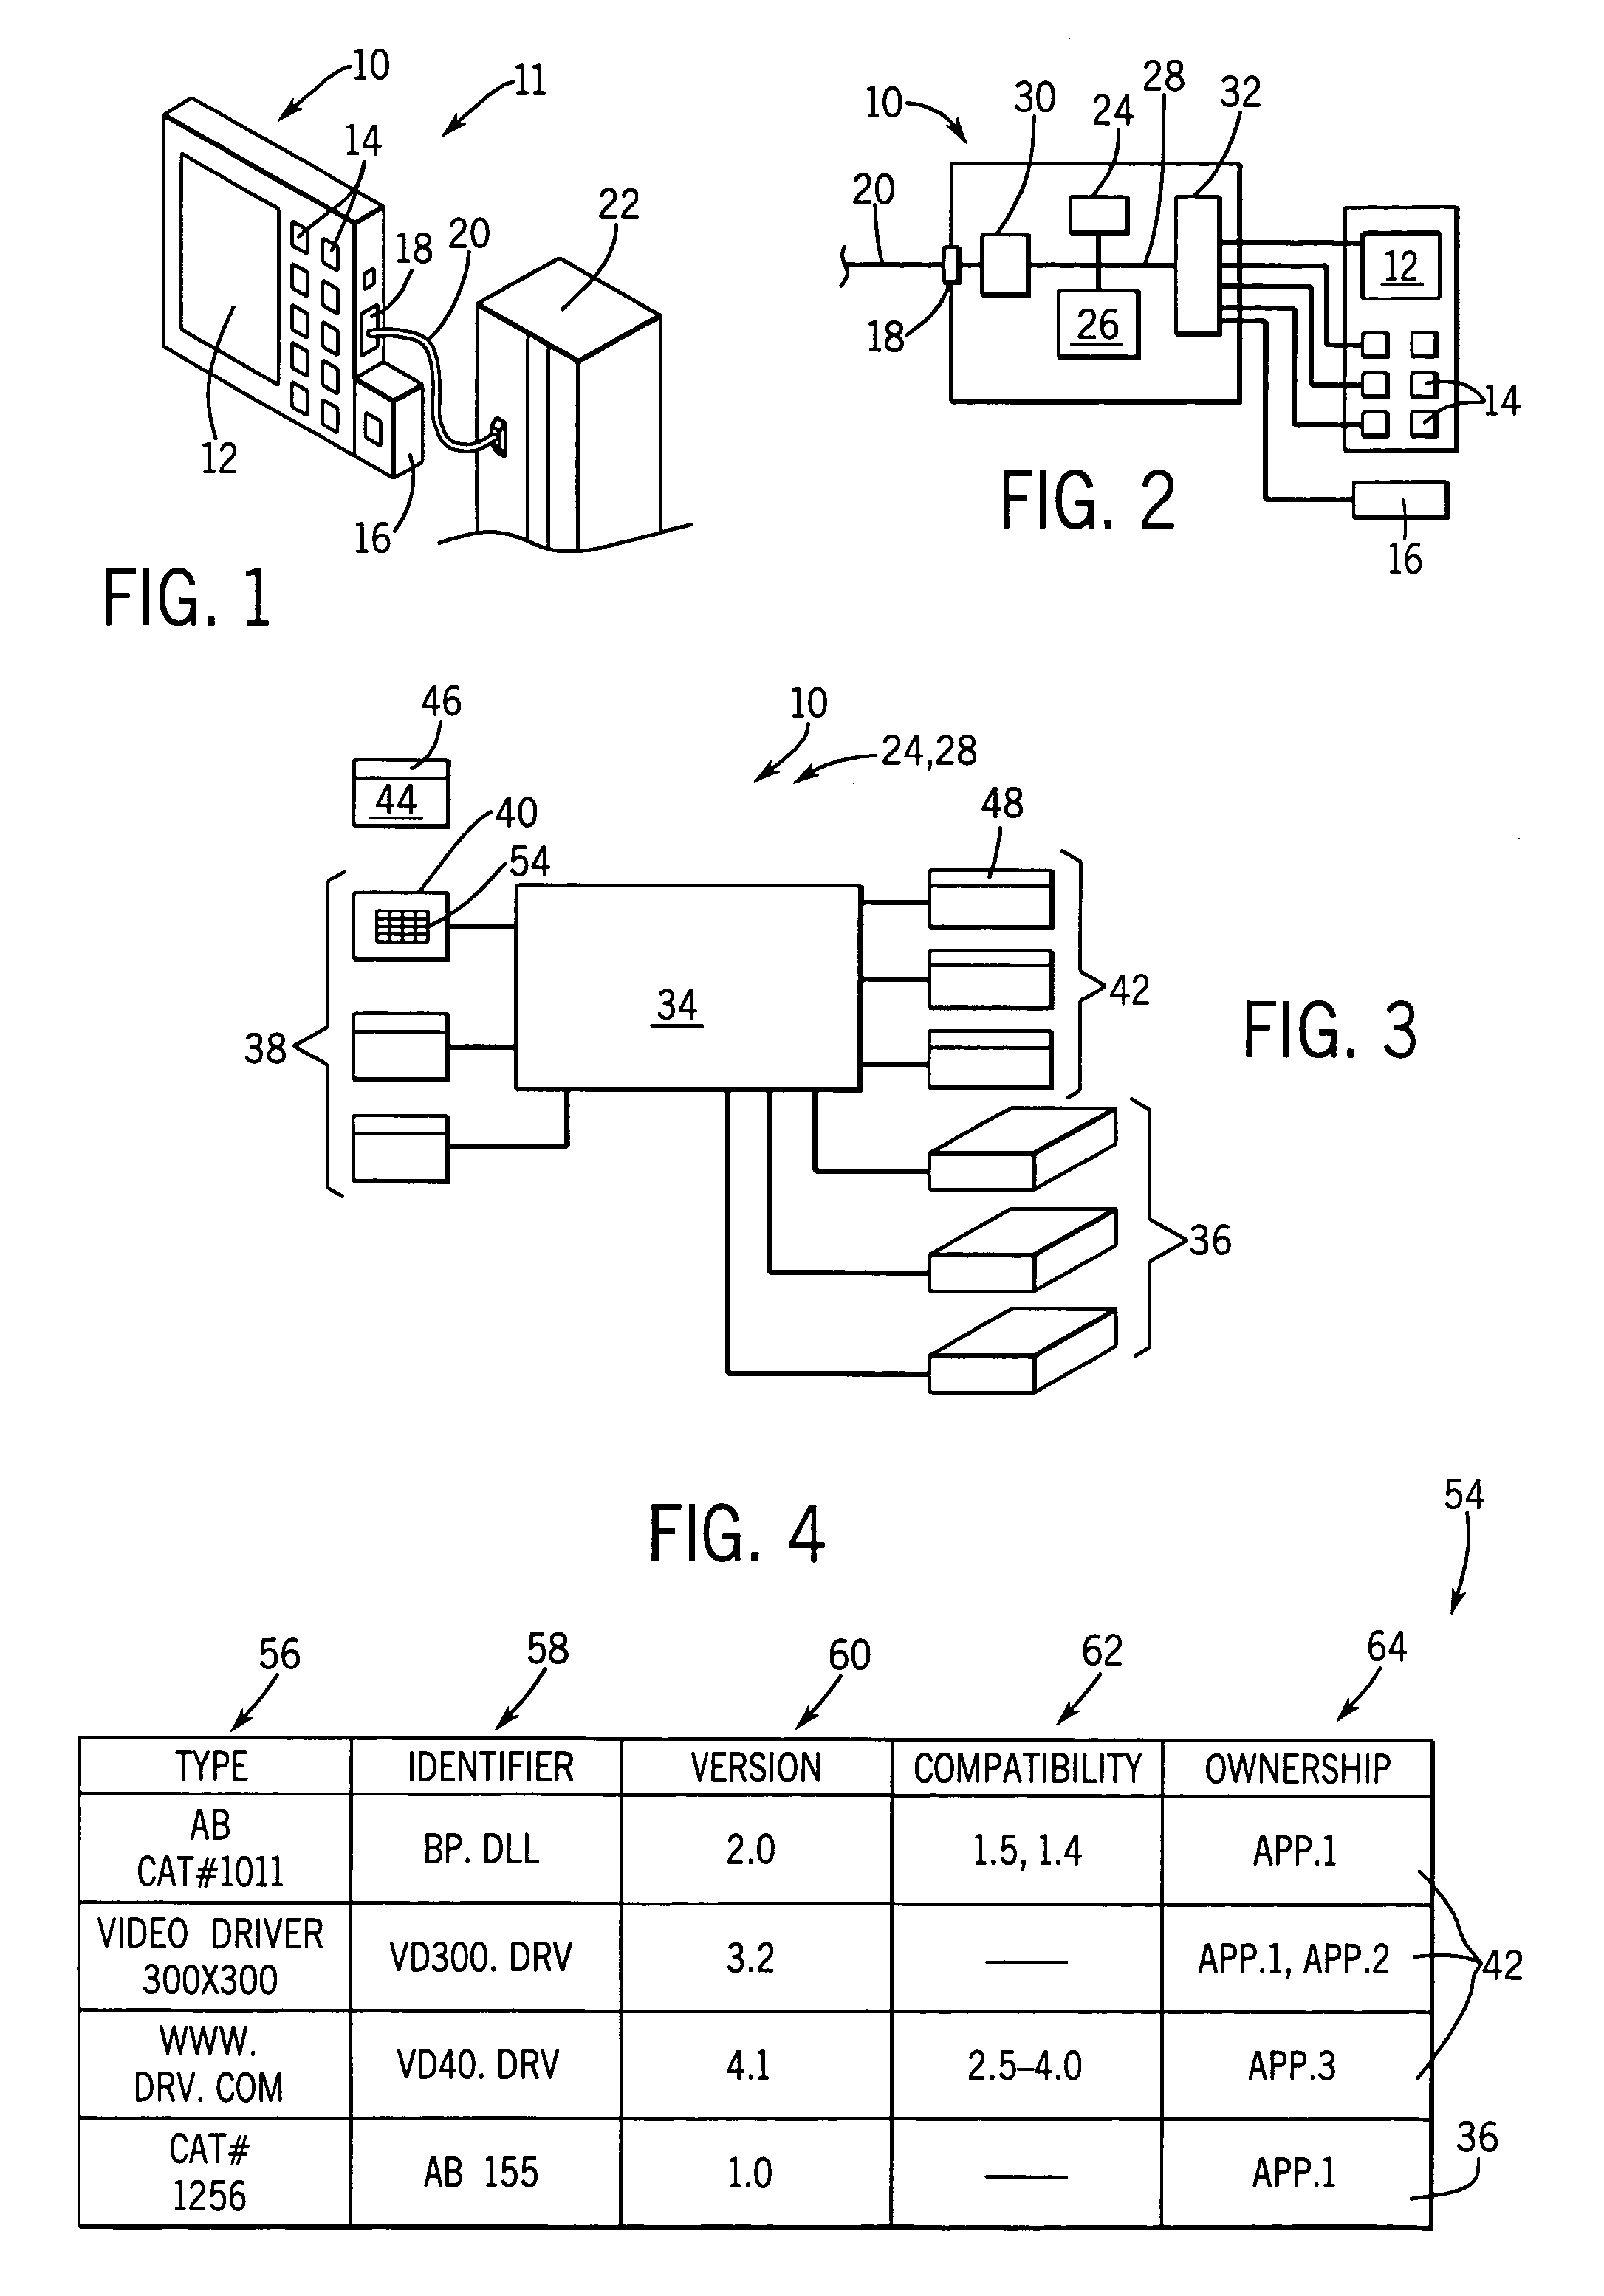 Component loader for industrial control device providing resource search capabilities